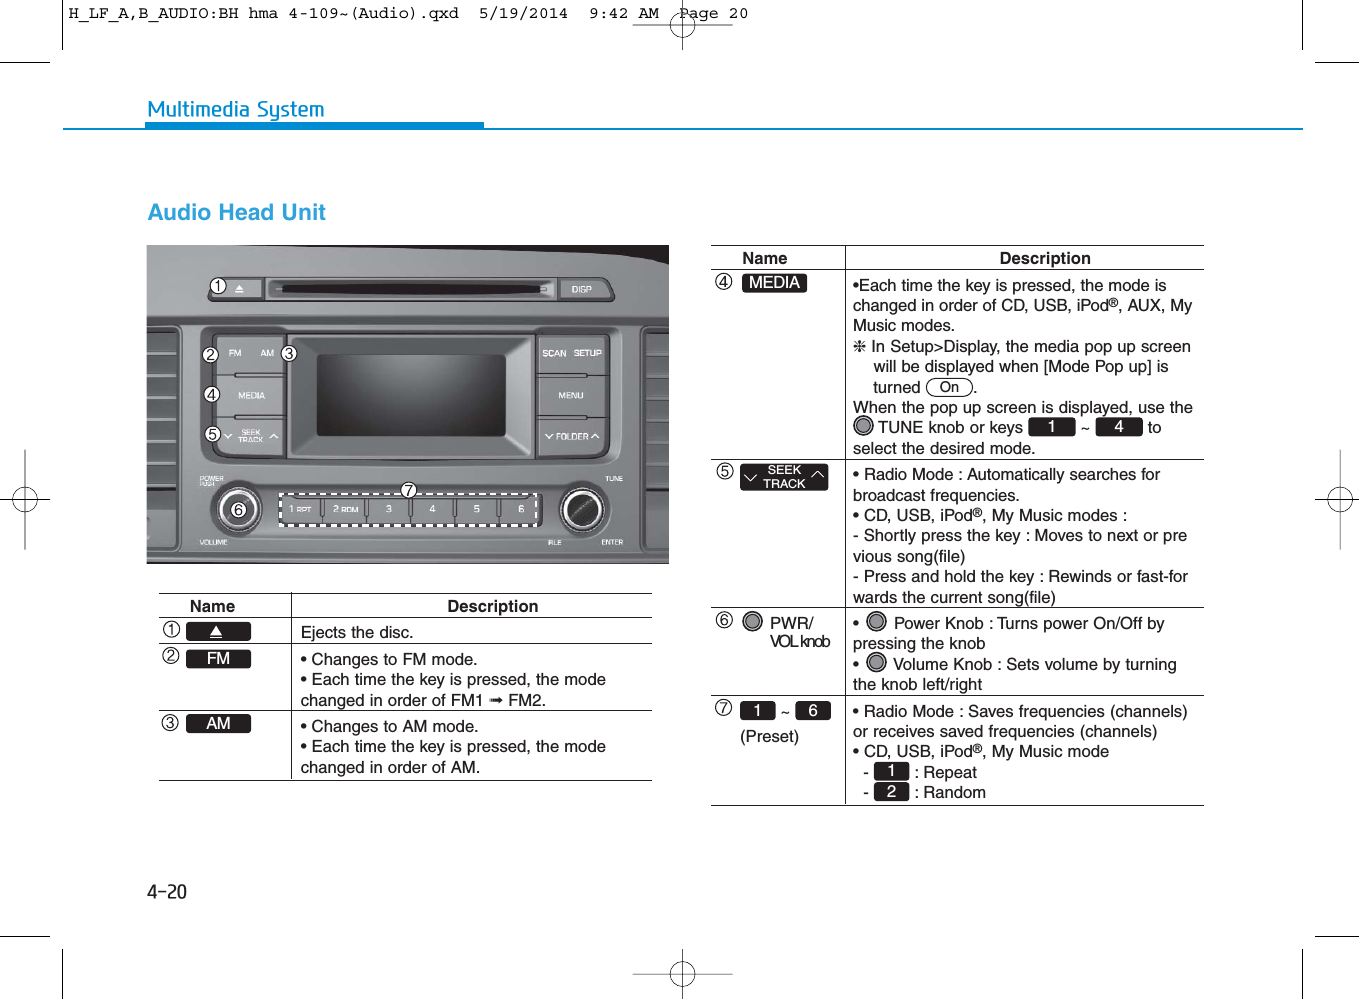 4-20Multimedia SystemAudio Head Unit Name DescriptionEjects the disc.• Changes to FM mode.• Each time the key is pressed, the mode changed in order of FM1 ➟FM2.• Changes to AM mode.• Each time the key is pressed, the mode changed in order of AM.AMFMName Description•Each time the key is pressed, the mode is changed in order of CD, USB, iPod®, AUX, My Music modes.❈In Setup&gt;Display, the media pop up screen will be displayed when [Mode Pop up] is   turned .When the pop up screen is displayed, use the TUNE knob or keys  ~  to select the desired mode.• Radio Mode : Automatically searches for broadcast frequencies.• CD, USB, iPod®, My Music modes :- Shortly press the key : Moves to next or previous song(file)- Press and hold the key : Rewinds or fast-forwards the current song(file)•  Power Knob : Turns power On/Off by pressing the knob•  Volume Knob : Sets volume by turning the knob left/right• Radio Mode : Saves frequencies (channels) or receives saved frequencies (channels)• CD, USB, iPod®, My Music mode- : Repeat- : Random2141OnPWR/ VOL knob~ (Preset)SEEKTRACK61MEDIAH_LF_A,B_AUDIO:BH hma 4-109~(Audio).qxd  5/19/2014  9:42 AM  Page 20